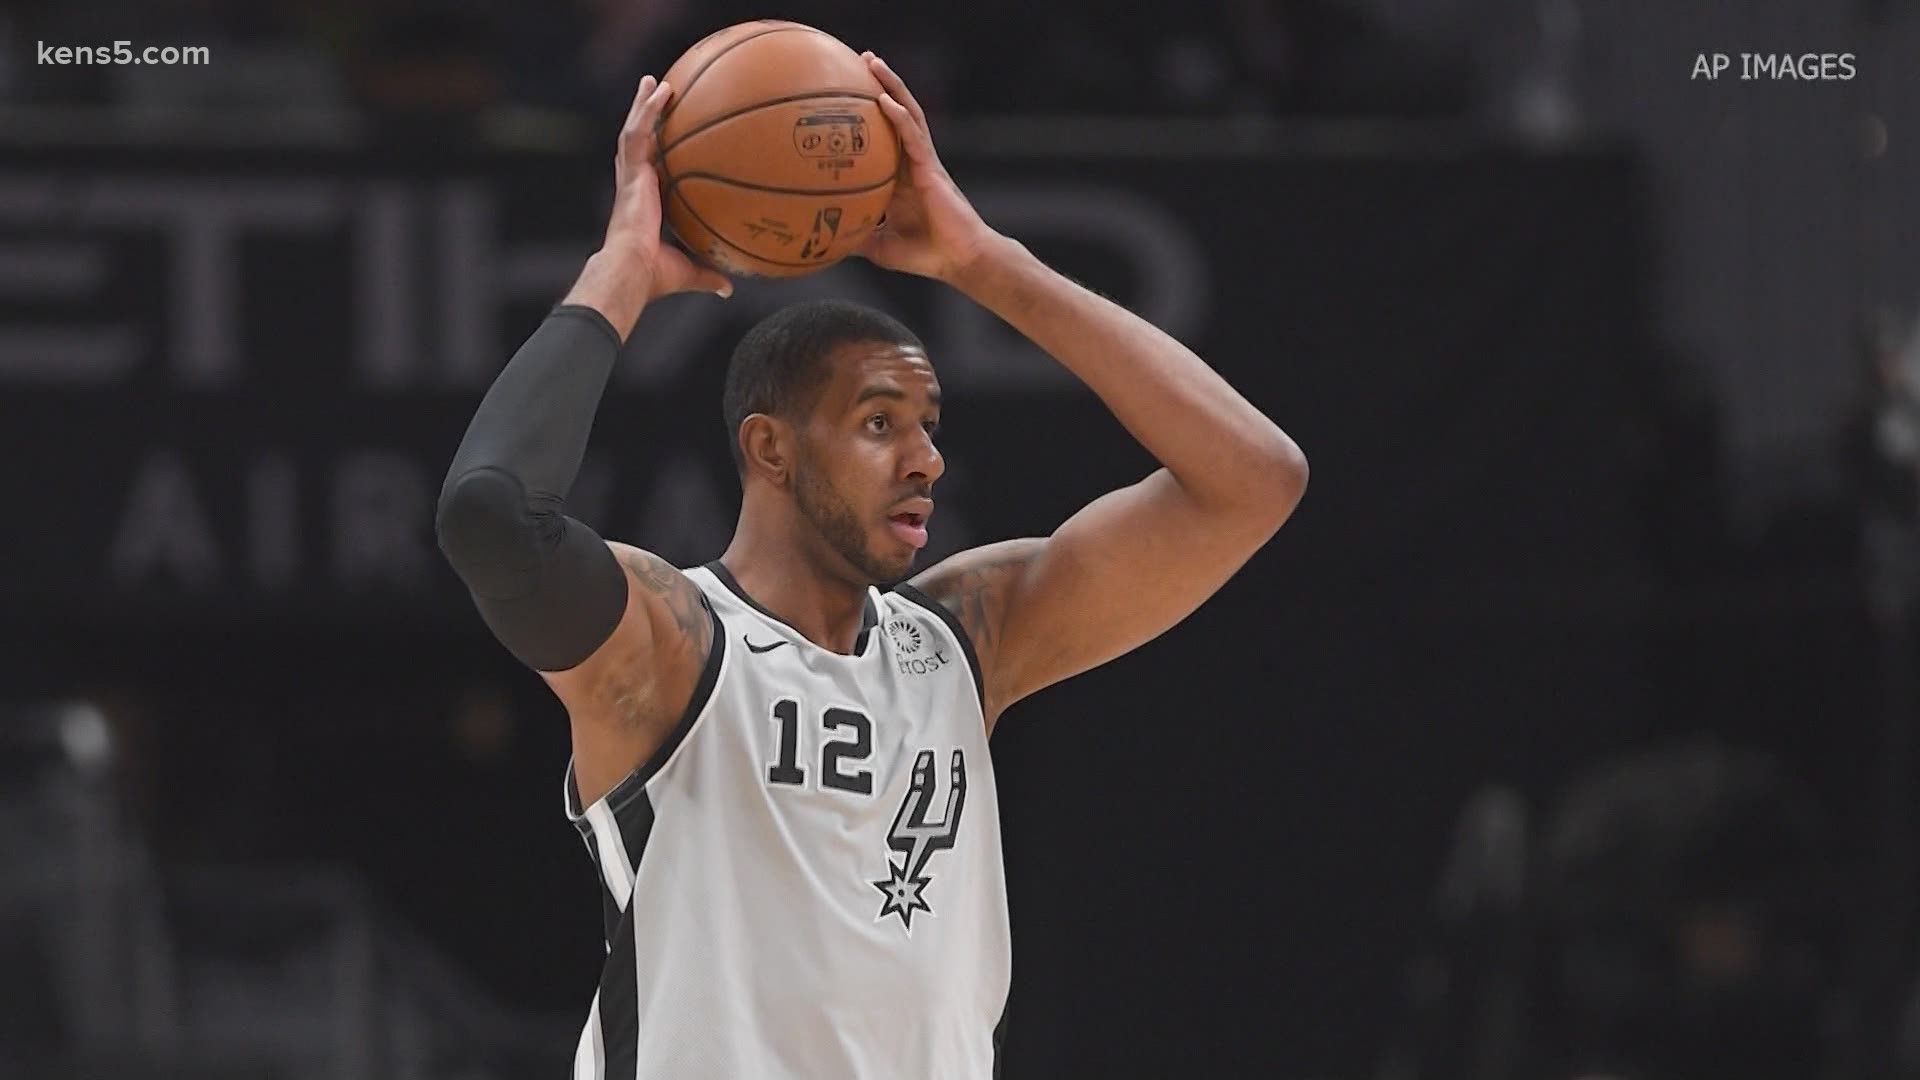 Aldridge cited an irregular heartbeat as the basis for his decision, which was announced not long after joining the Brooklyn Nets.